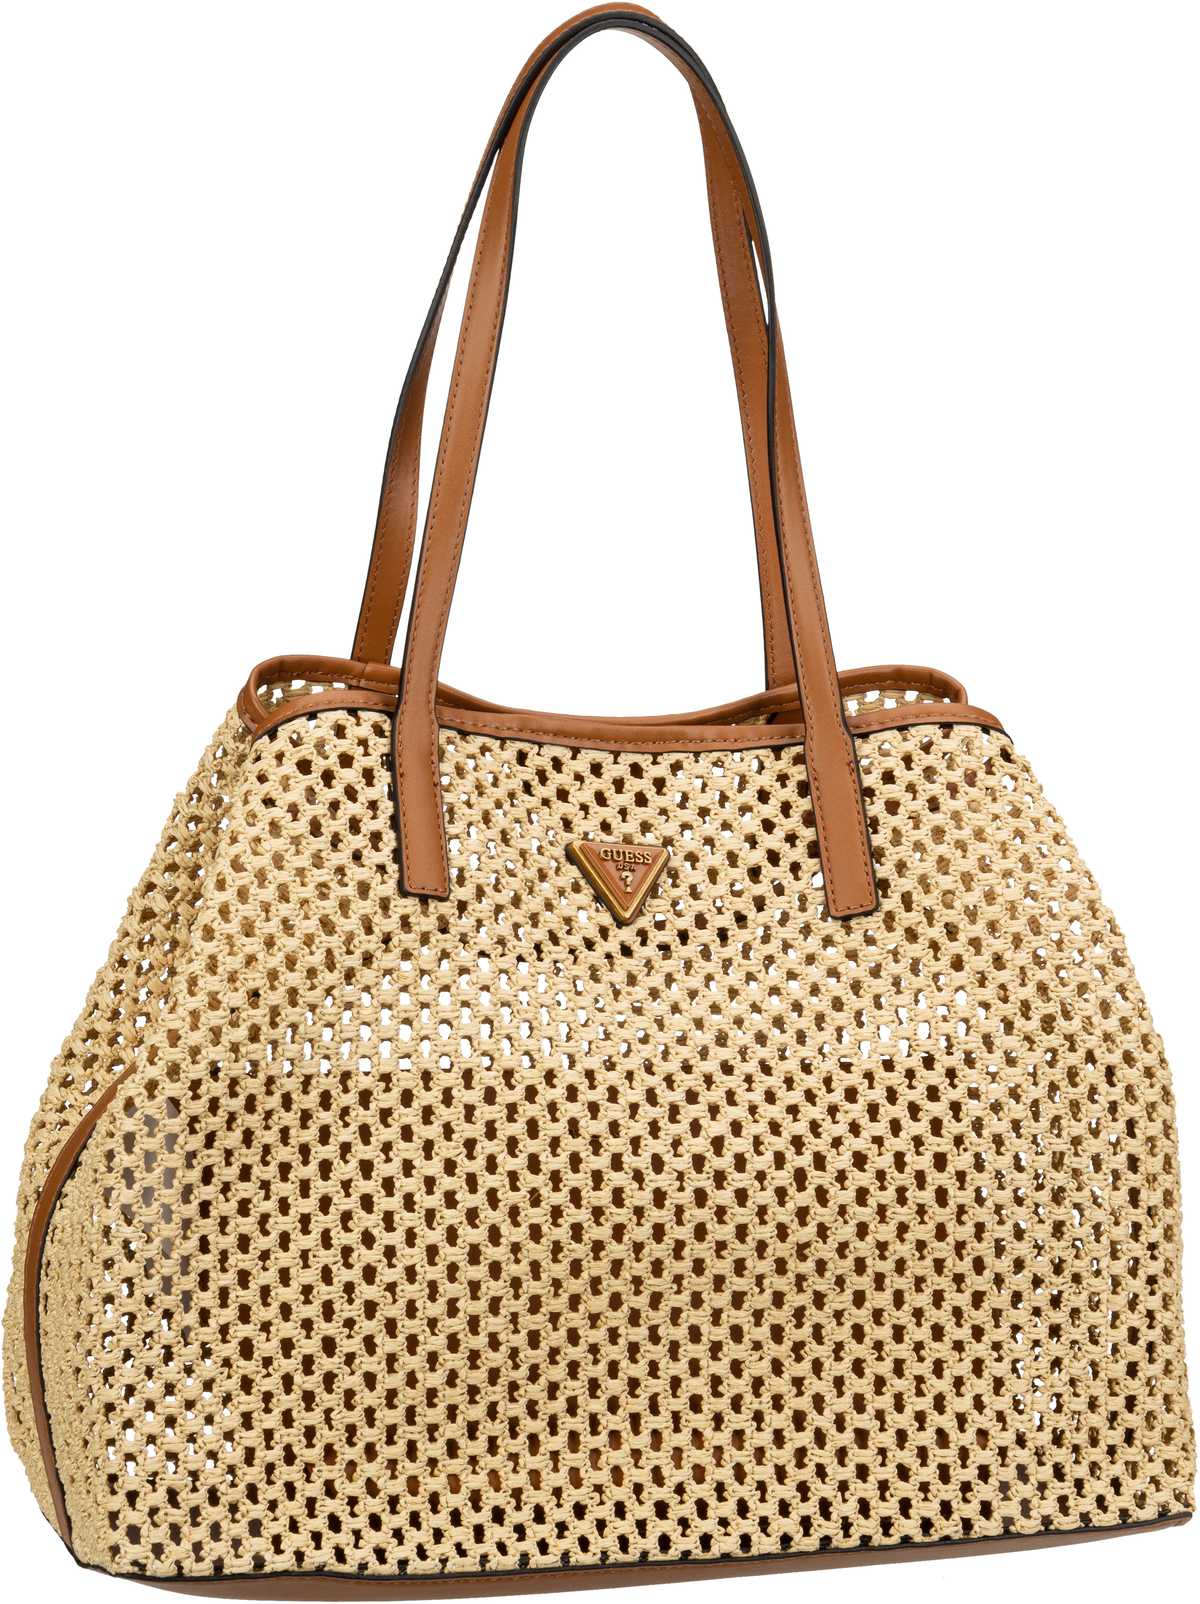 Guess Vikky Tote Straw - Cognac